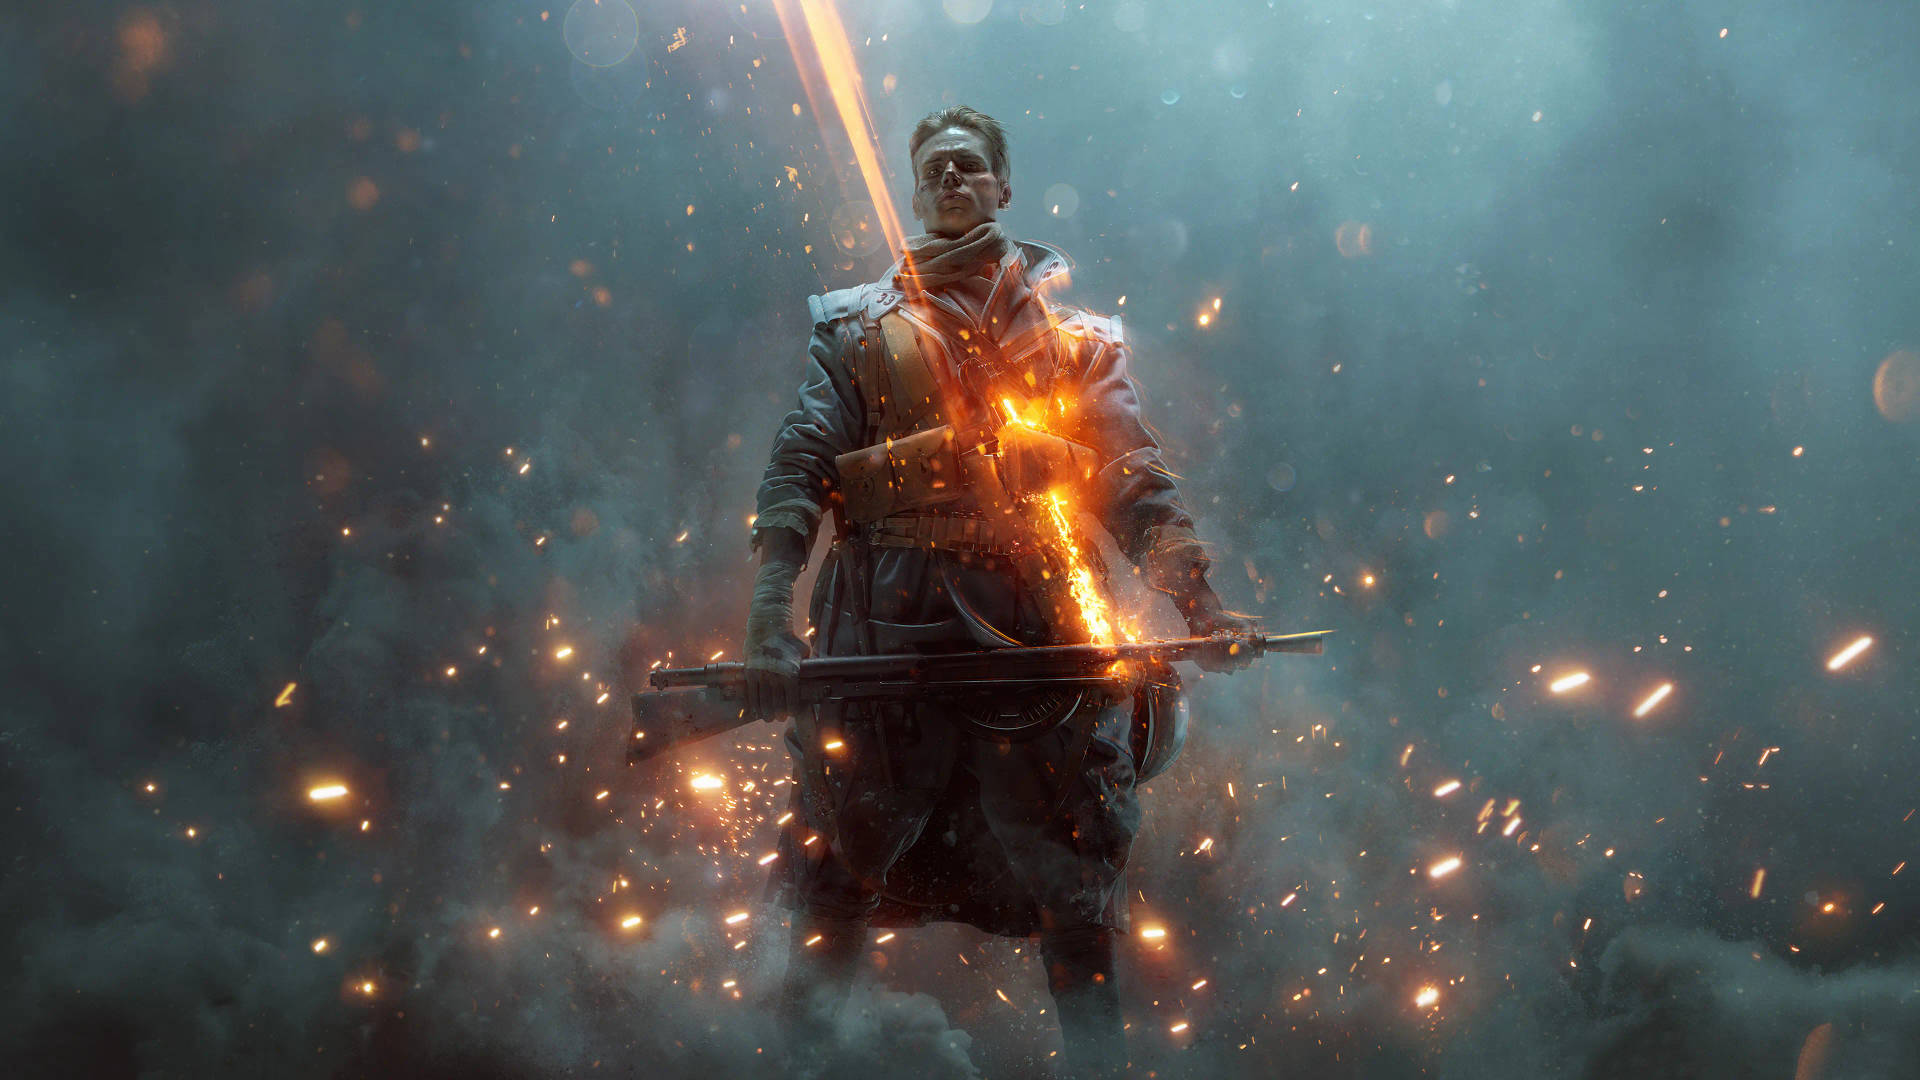 Caption: Stunning 4k Representation Of A French Soldier Wielding A Chauchat In Battlefield 1